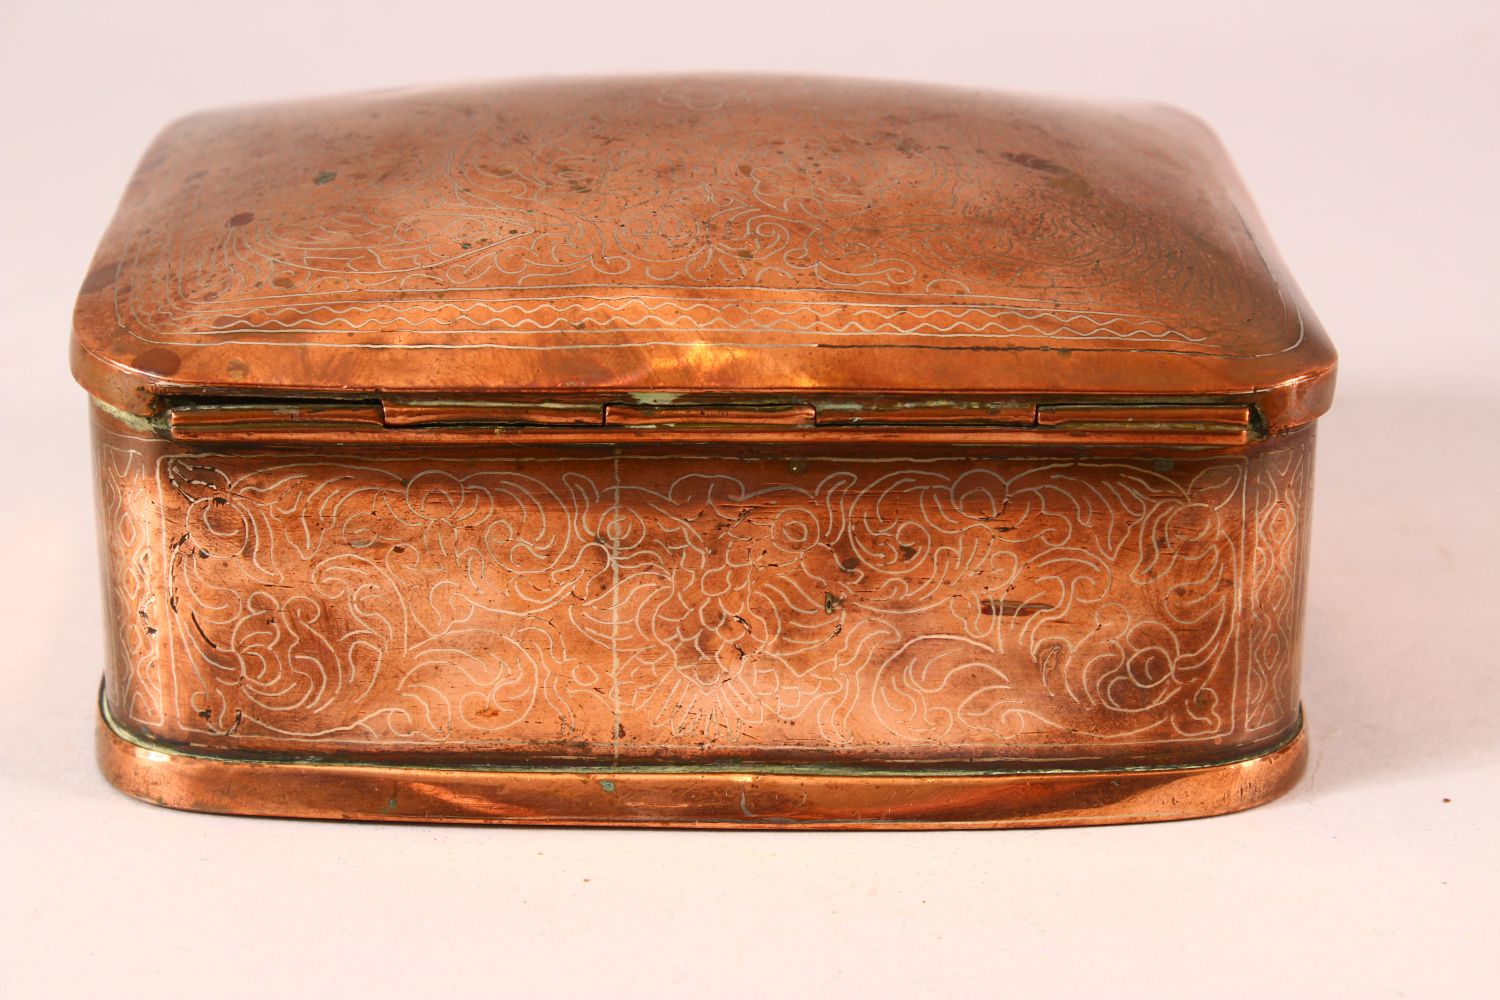 A FINE 19TH CENTURY SRI LANKAN OR BURMESE SILVER INLAID COPPER BOX - decorated with silver inlay - Image 3 of 7